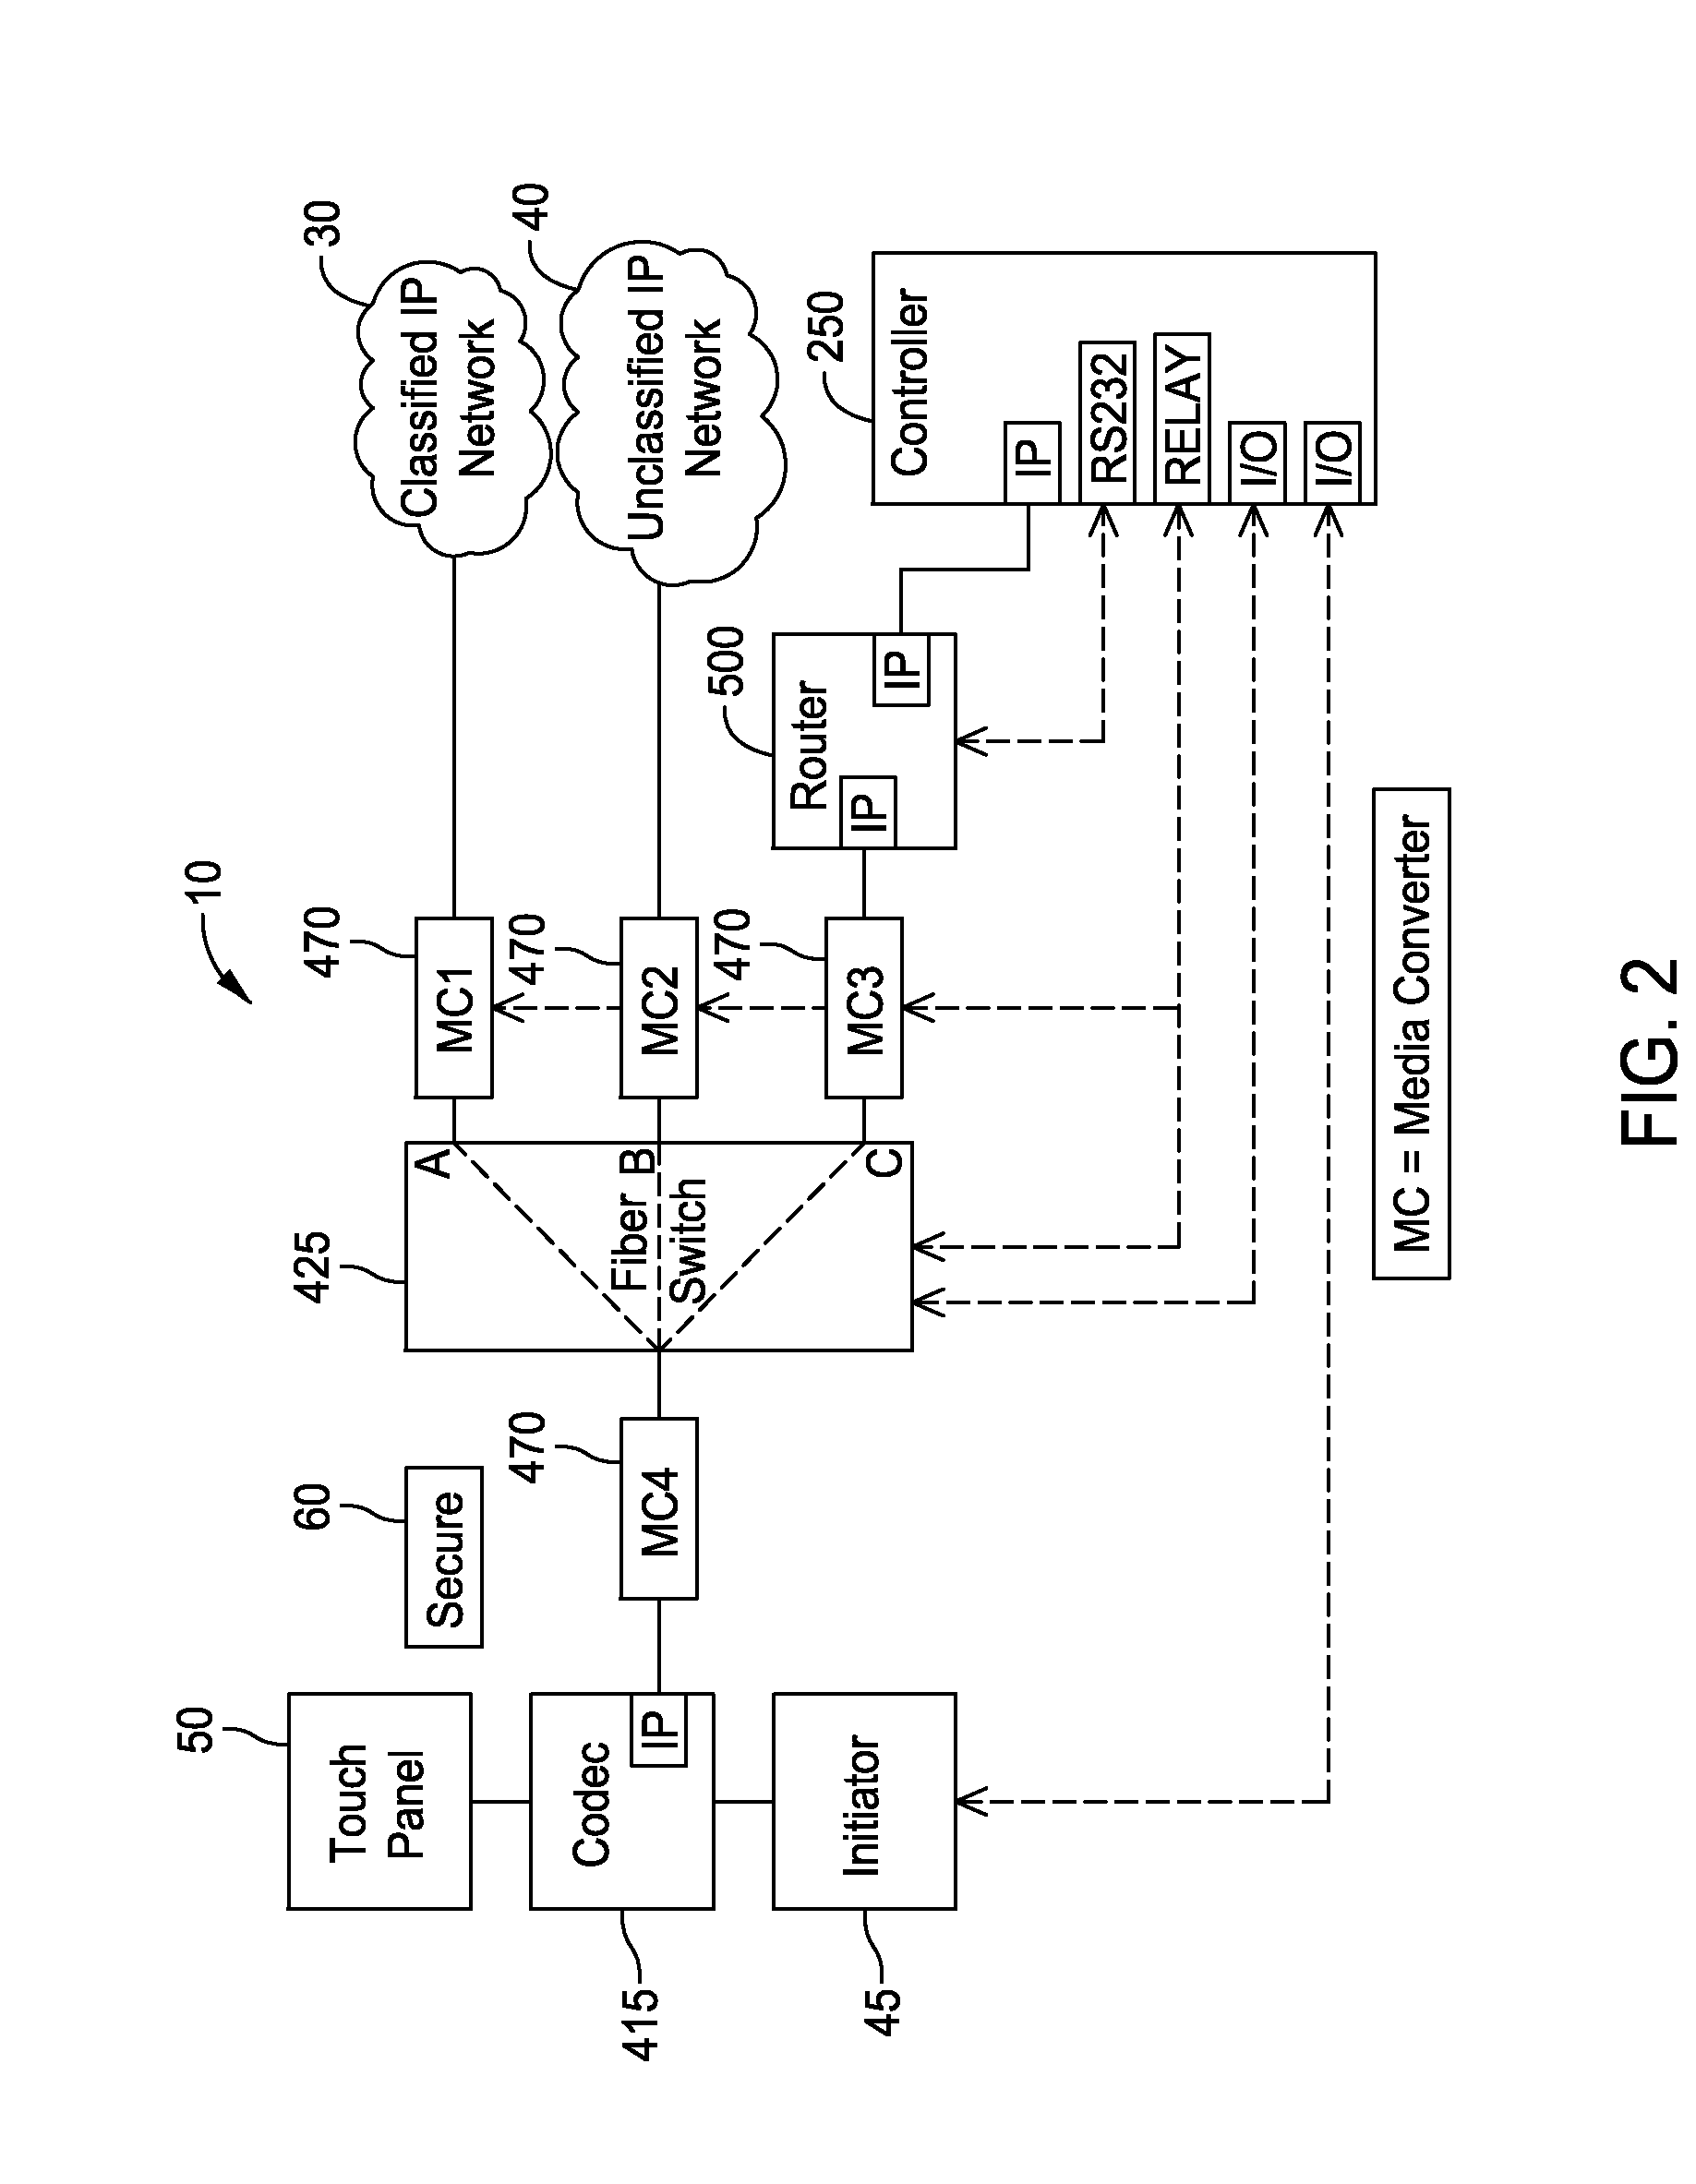 Internet protocol switching system and associated method of use